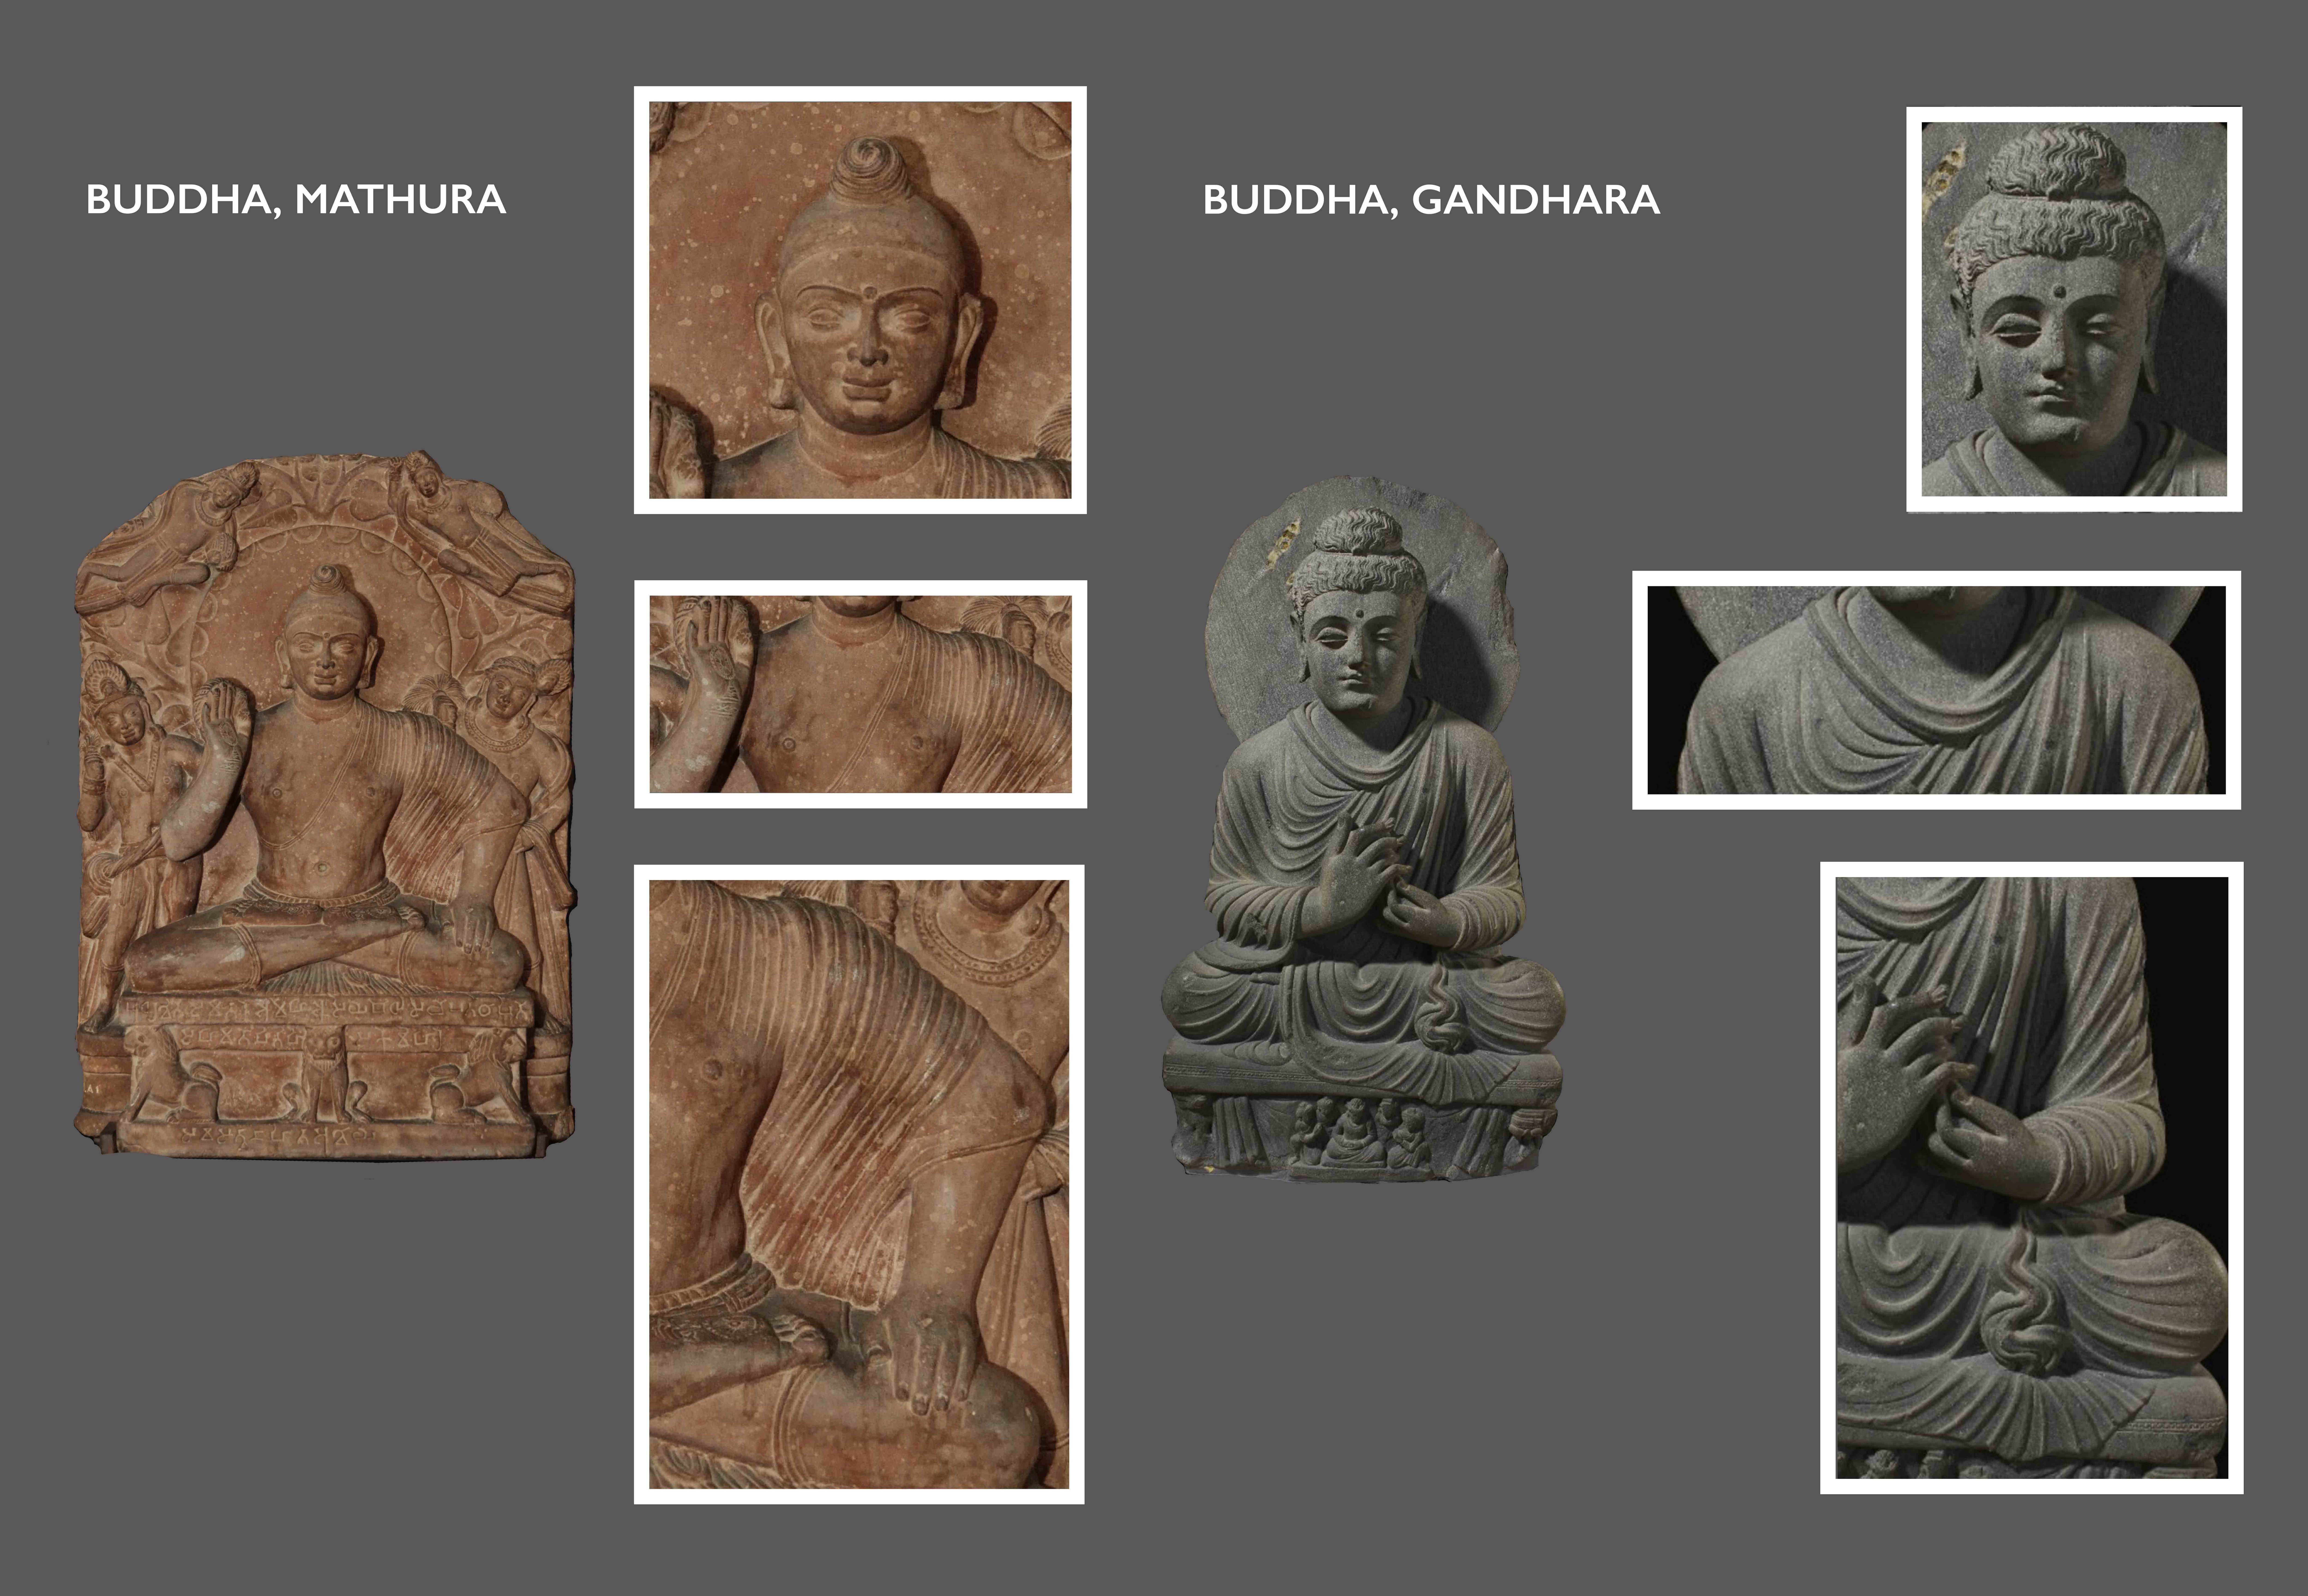 A comparison of a Buddha from Mathura and Buddha from Gandhara. Left: Katra stele, Government Museum, Mathura (photo: Biswarup Ganguly, CC BY-3.0); right: The Buddha, c. 2nd–3rd century C.E., from Gandhara, schist, approximately 37 x 21 x 9 inches (The British Museum). Note the differences in the style of the Buddhas' hair, robe, and drapery.